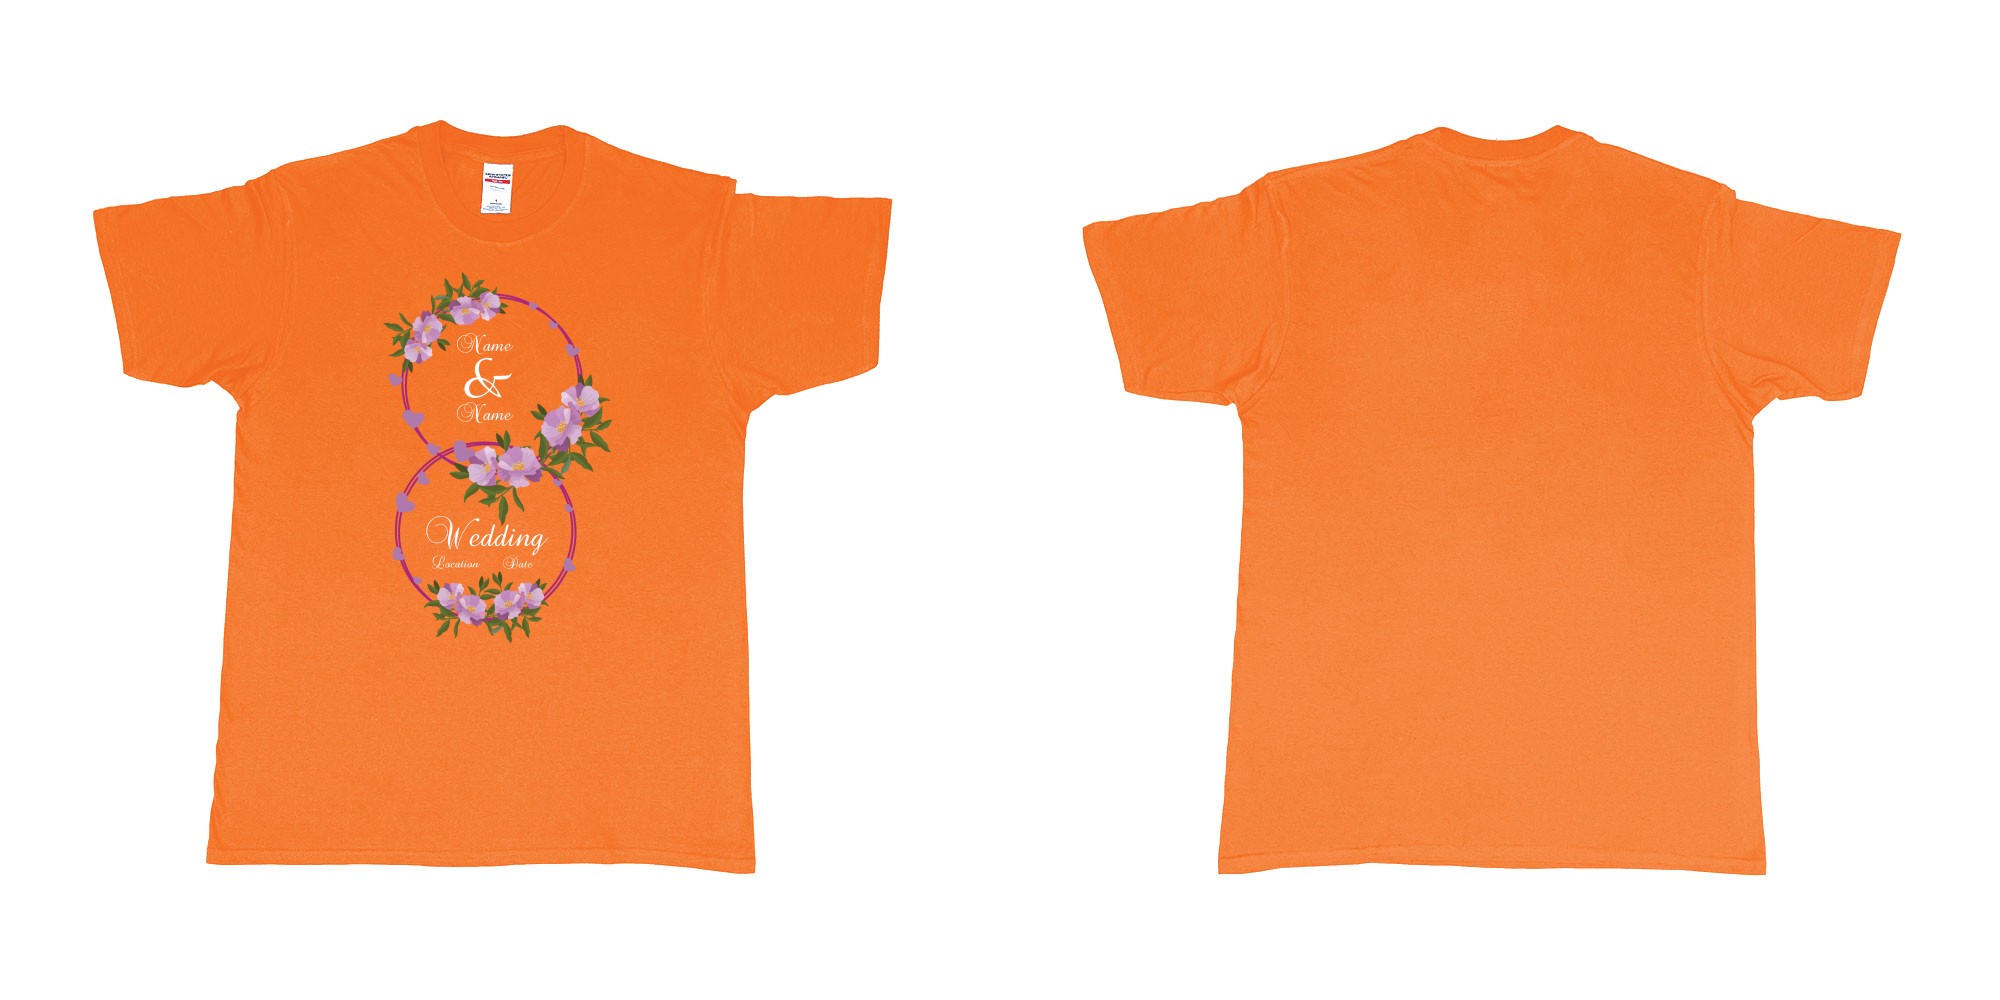 Custom tshirt design wedding hearts flower rings in fabric color orange choice your own text made in Bali by The Pirate Way